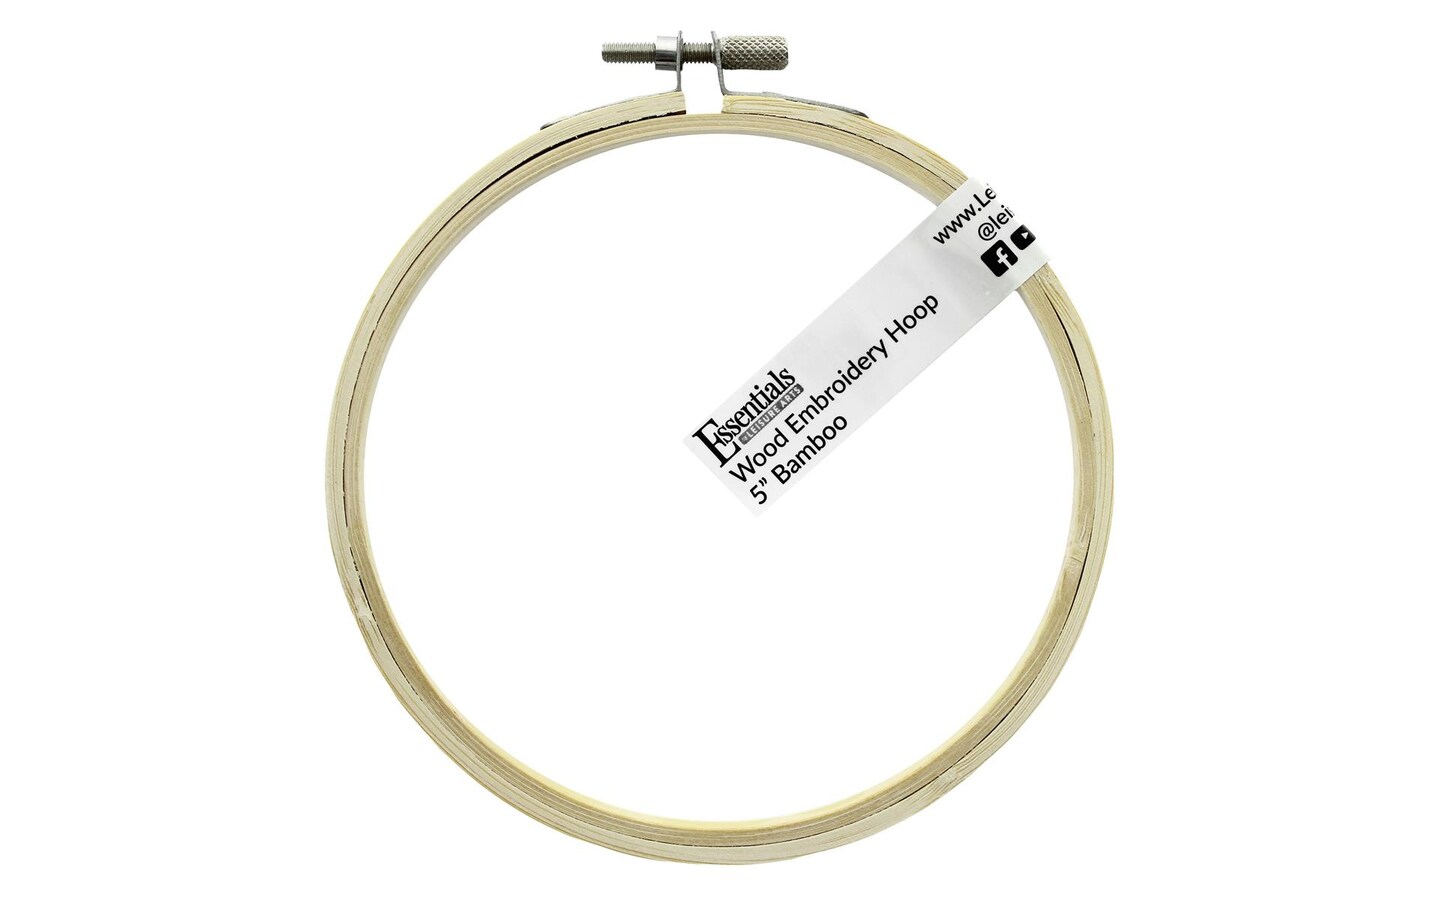 Essentials by Leisure Arts Wood Embroidery Hoop 5 Bamboo - wooden hoops  for crafts - embroidery hoop holder - cross stitch hoop - cross stitch  hoops